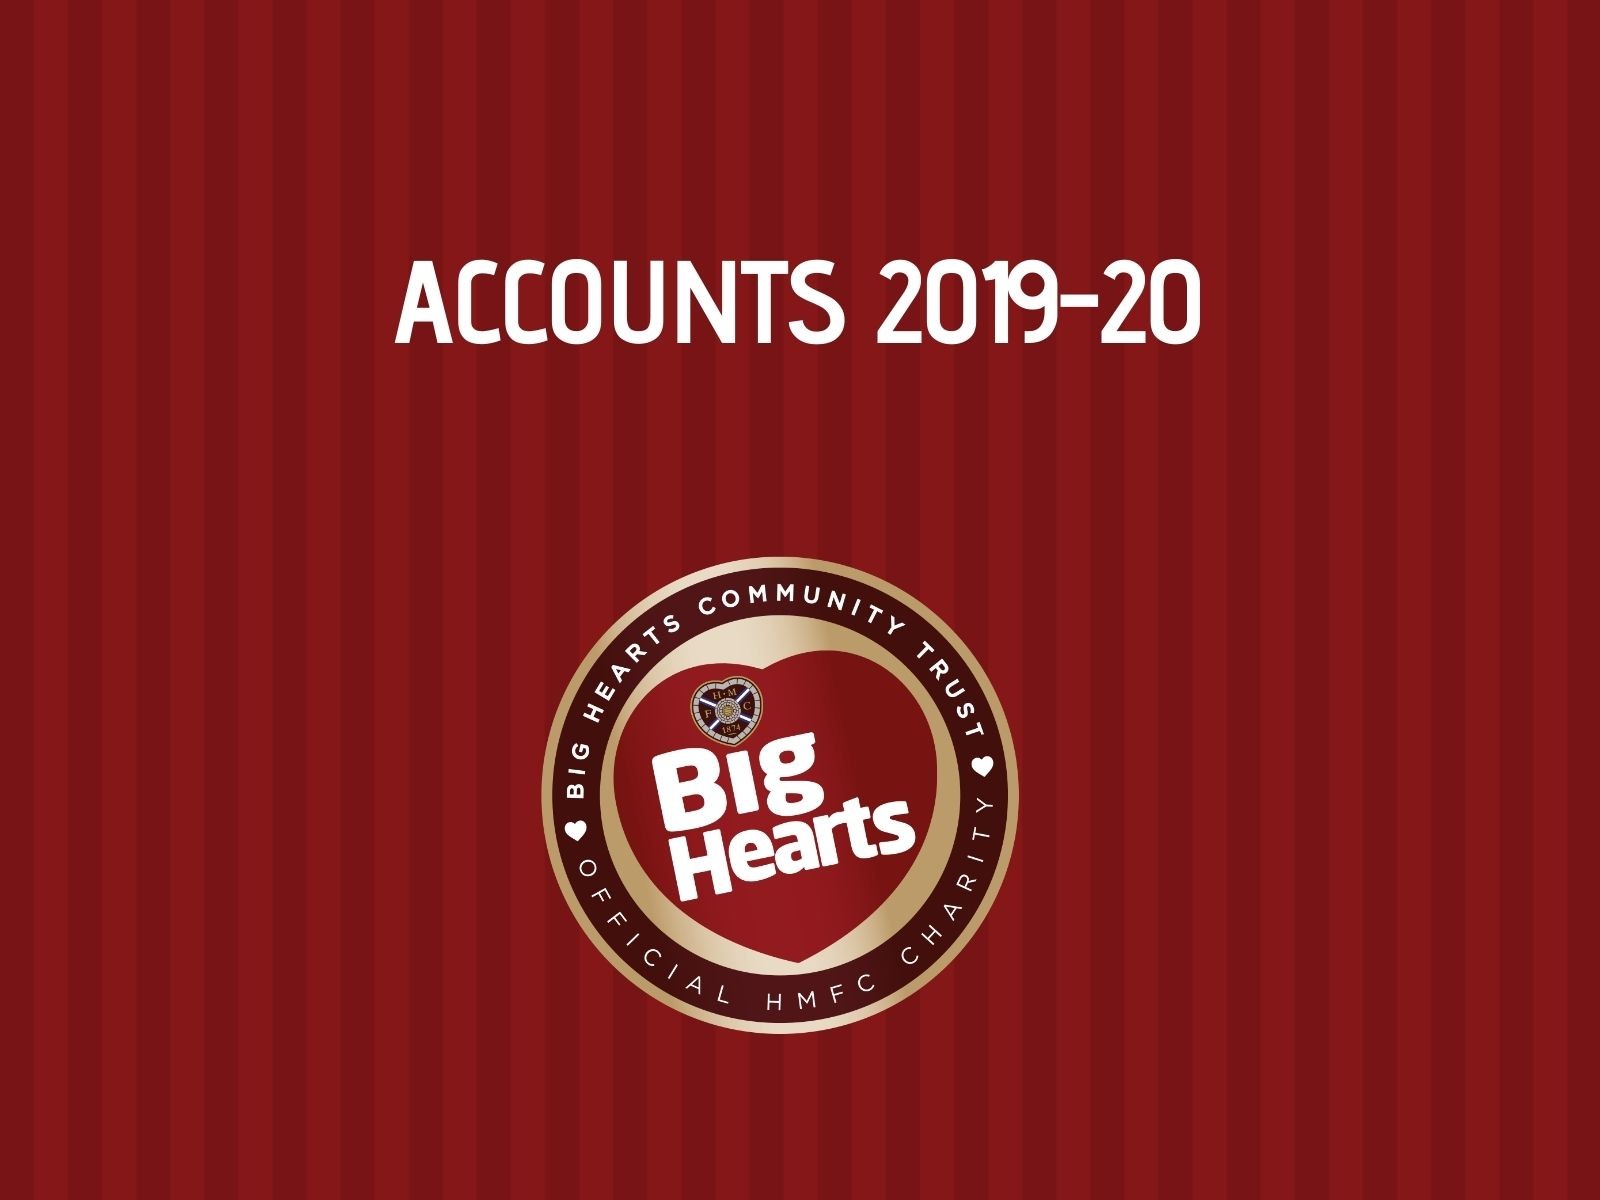  » FINANCIAL POSITION: BIG HEARTS ACCOUNTS 2019-20 NOW AVAILABLE